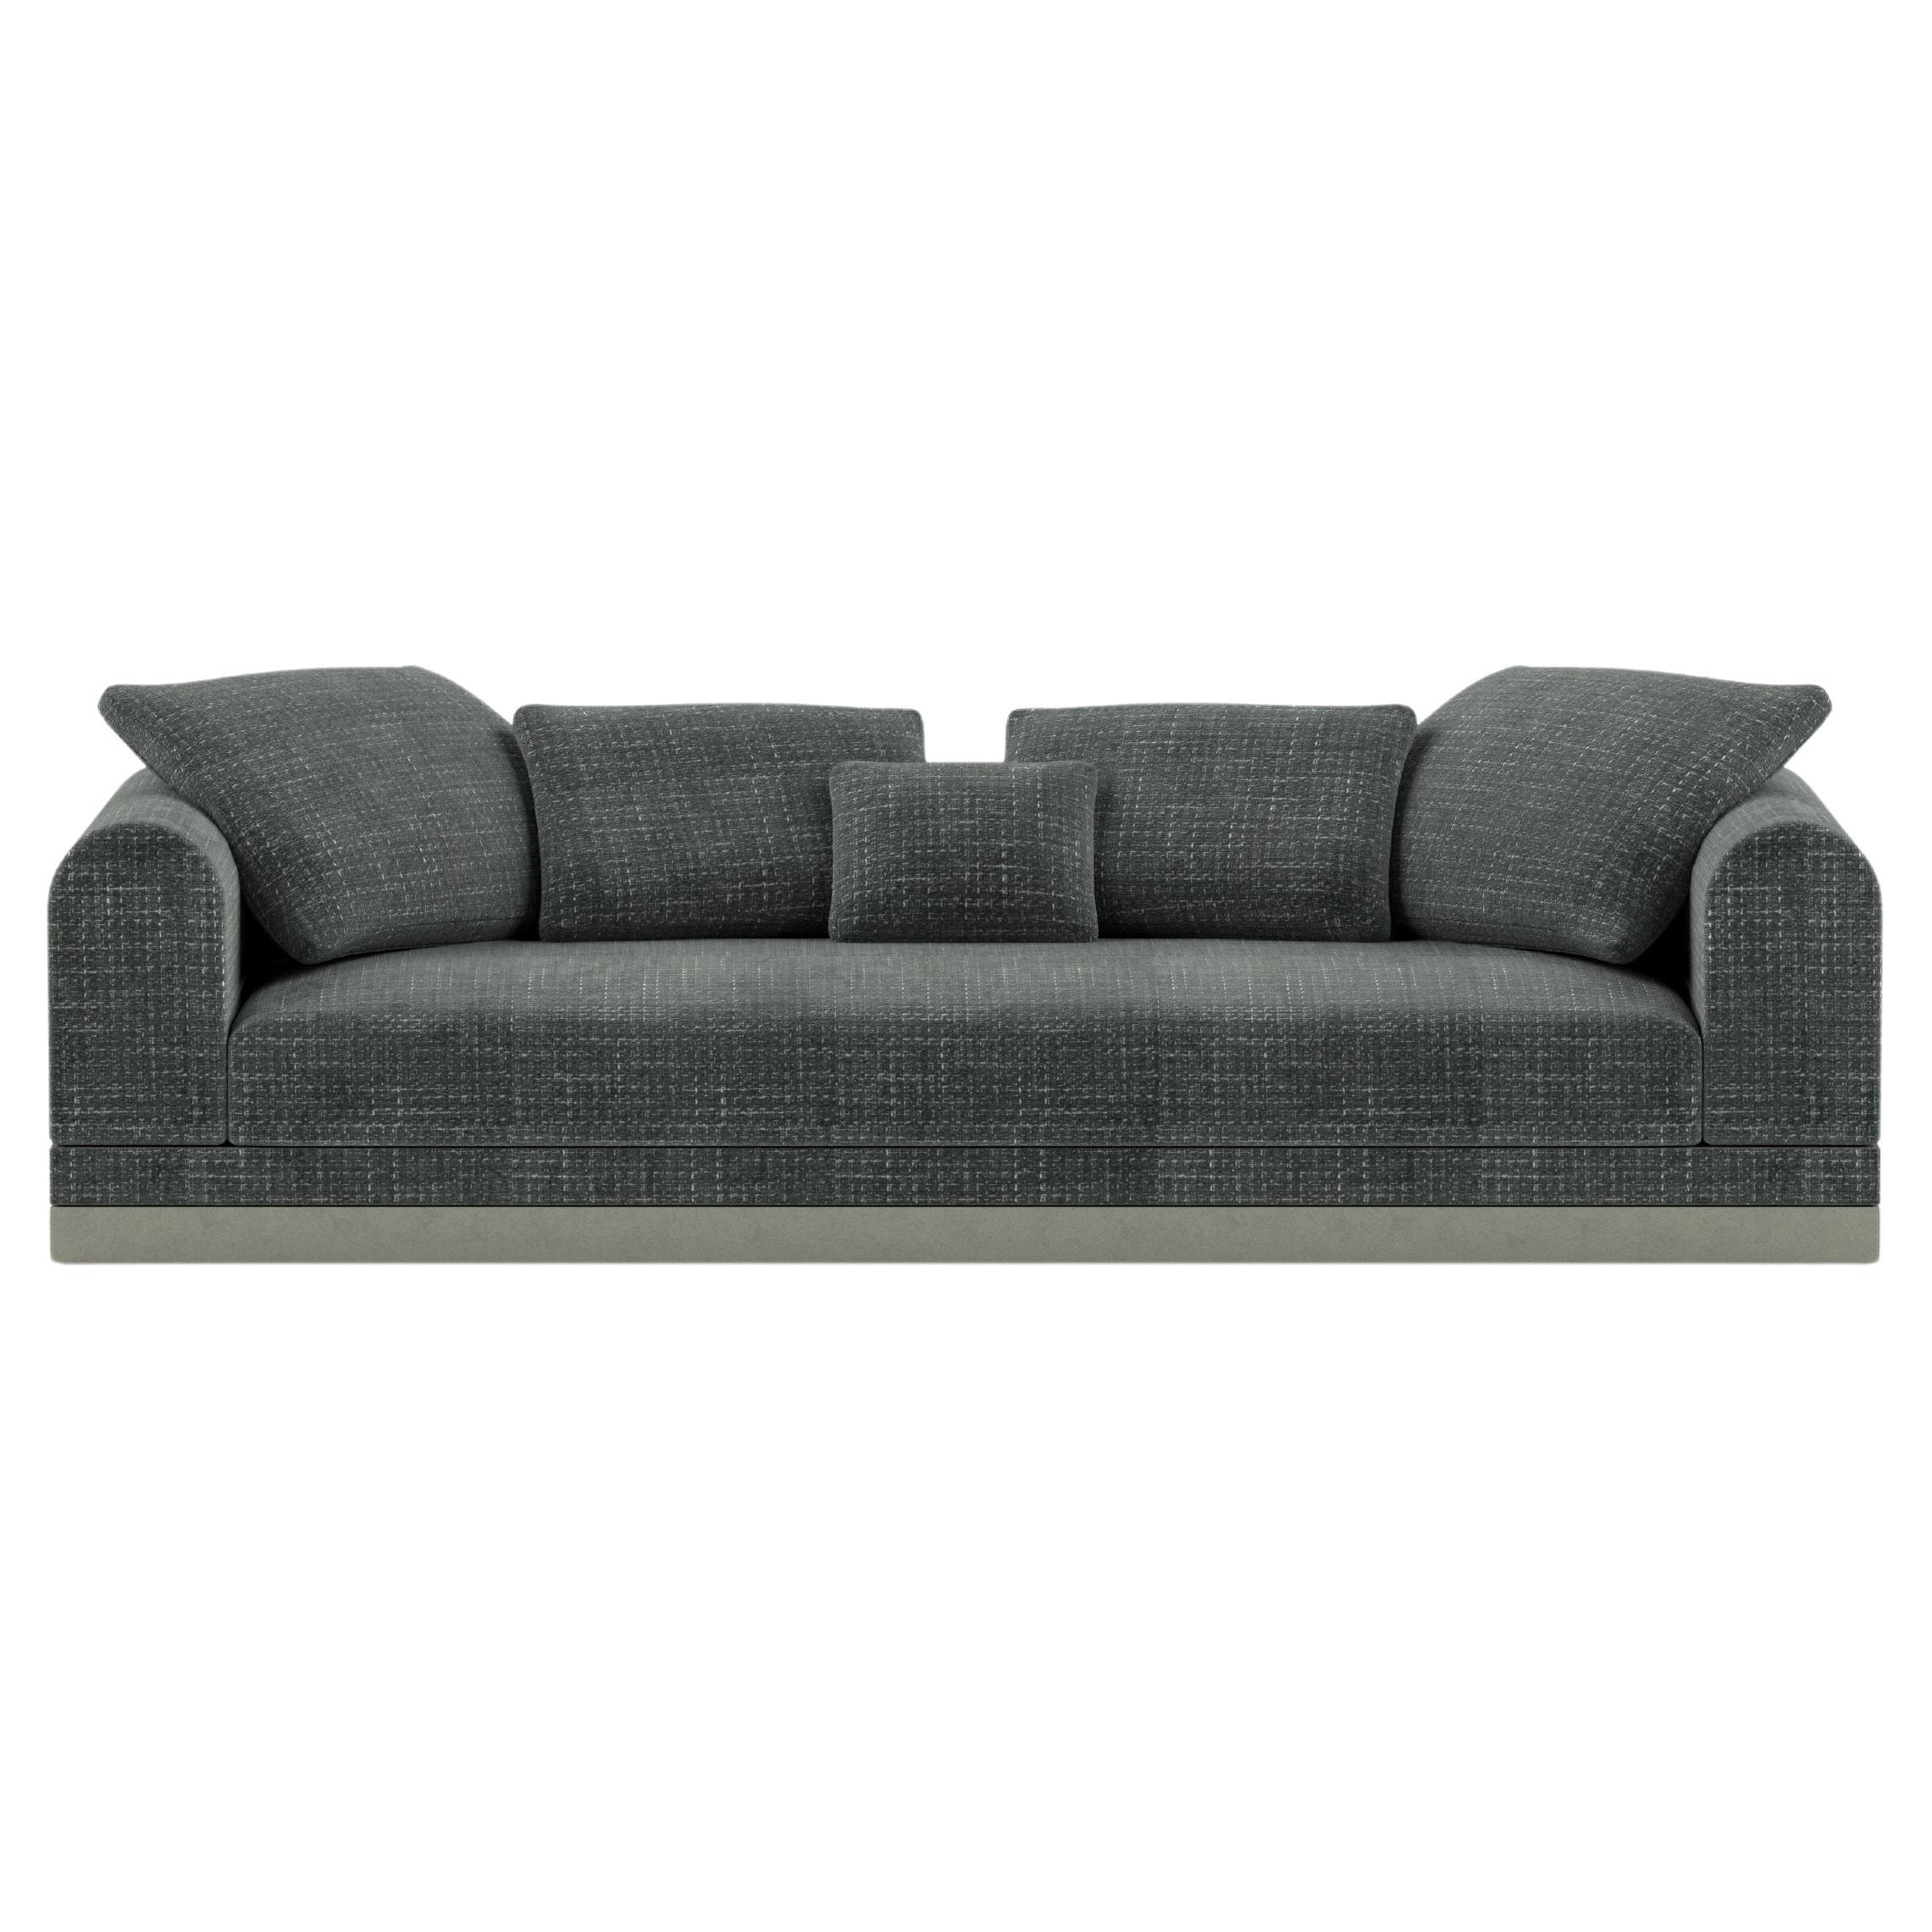 Contemporary Large Sofa 'Aqueduct' by Poiat, Yang 95, Low Plinth